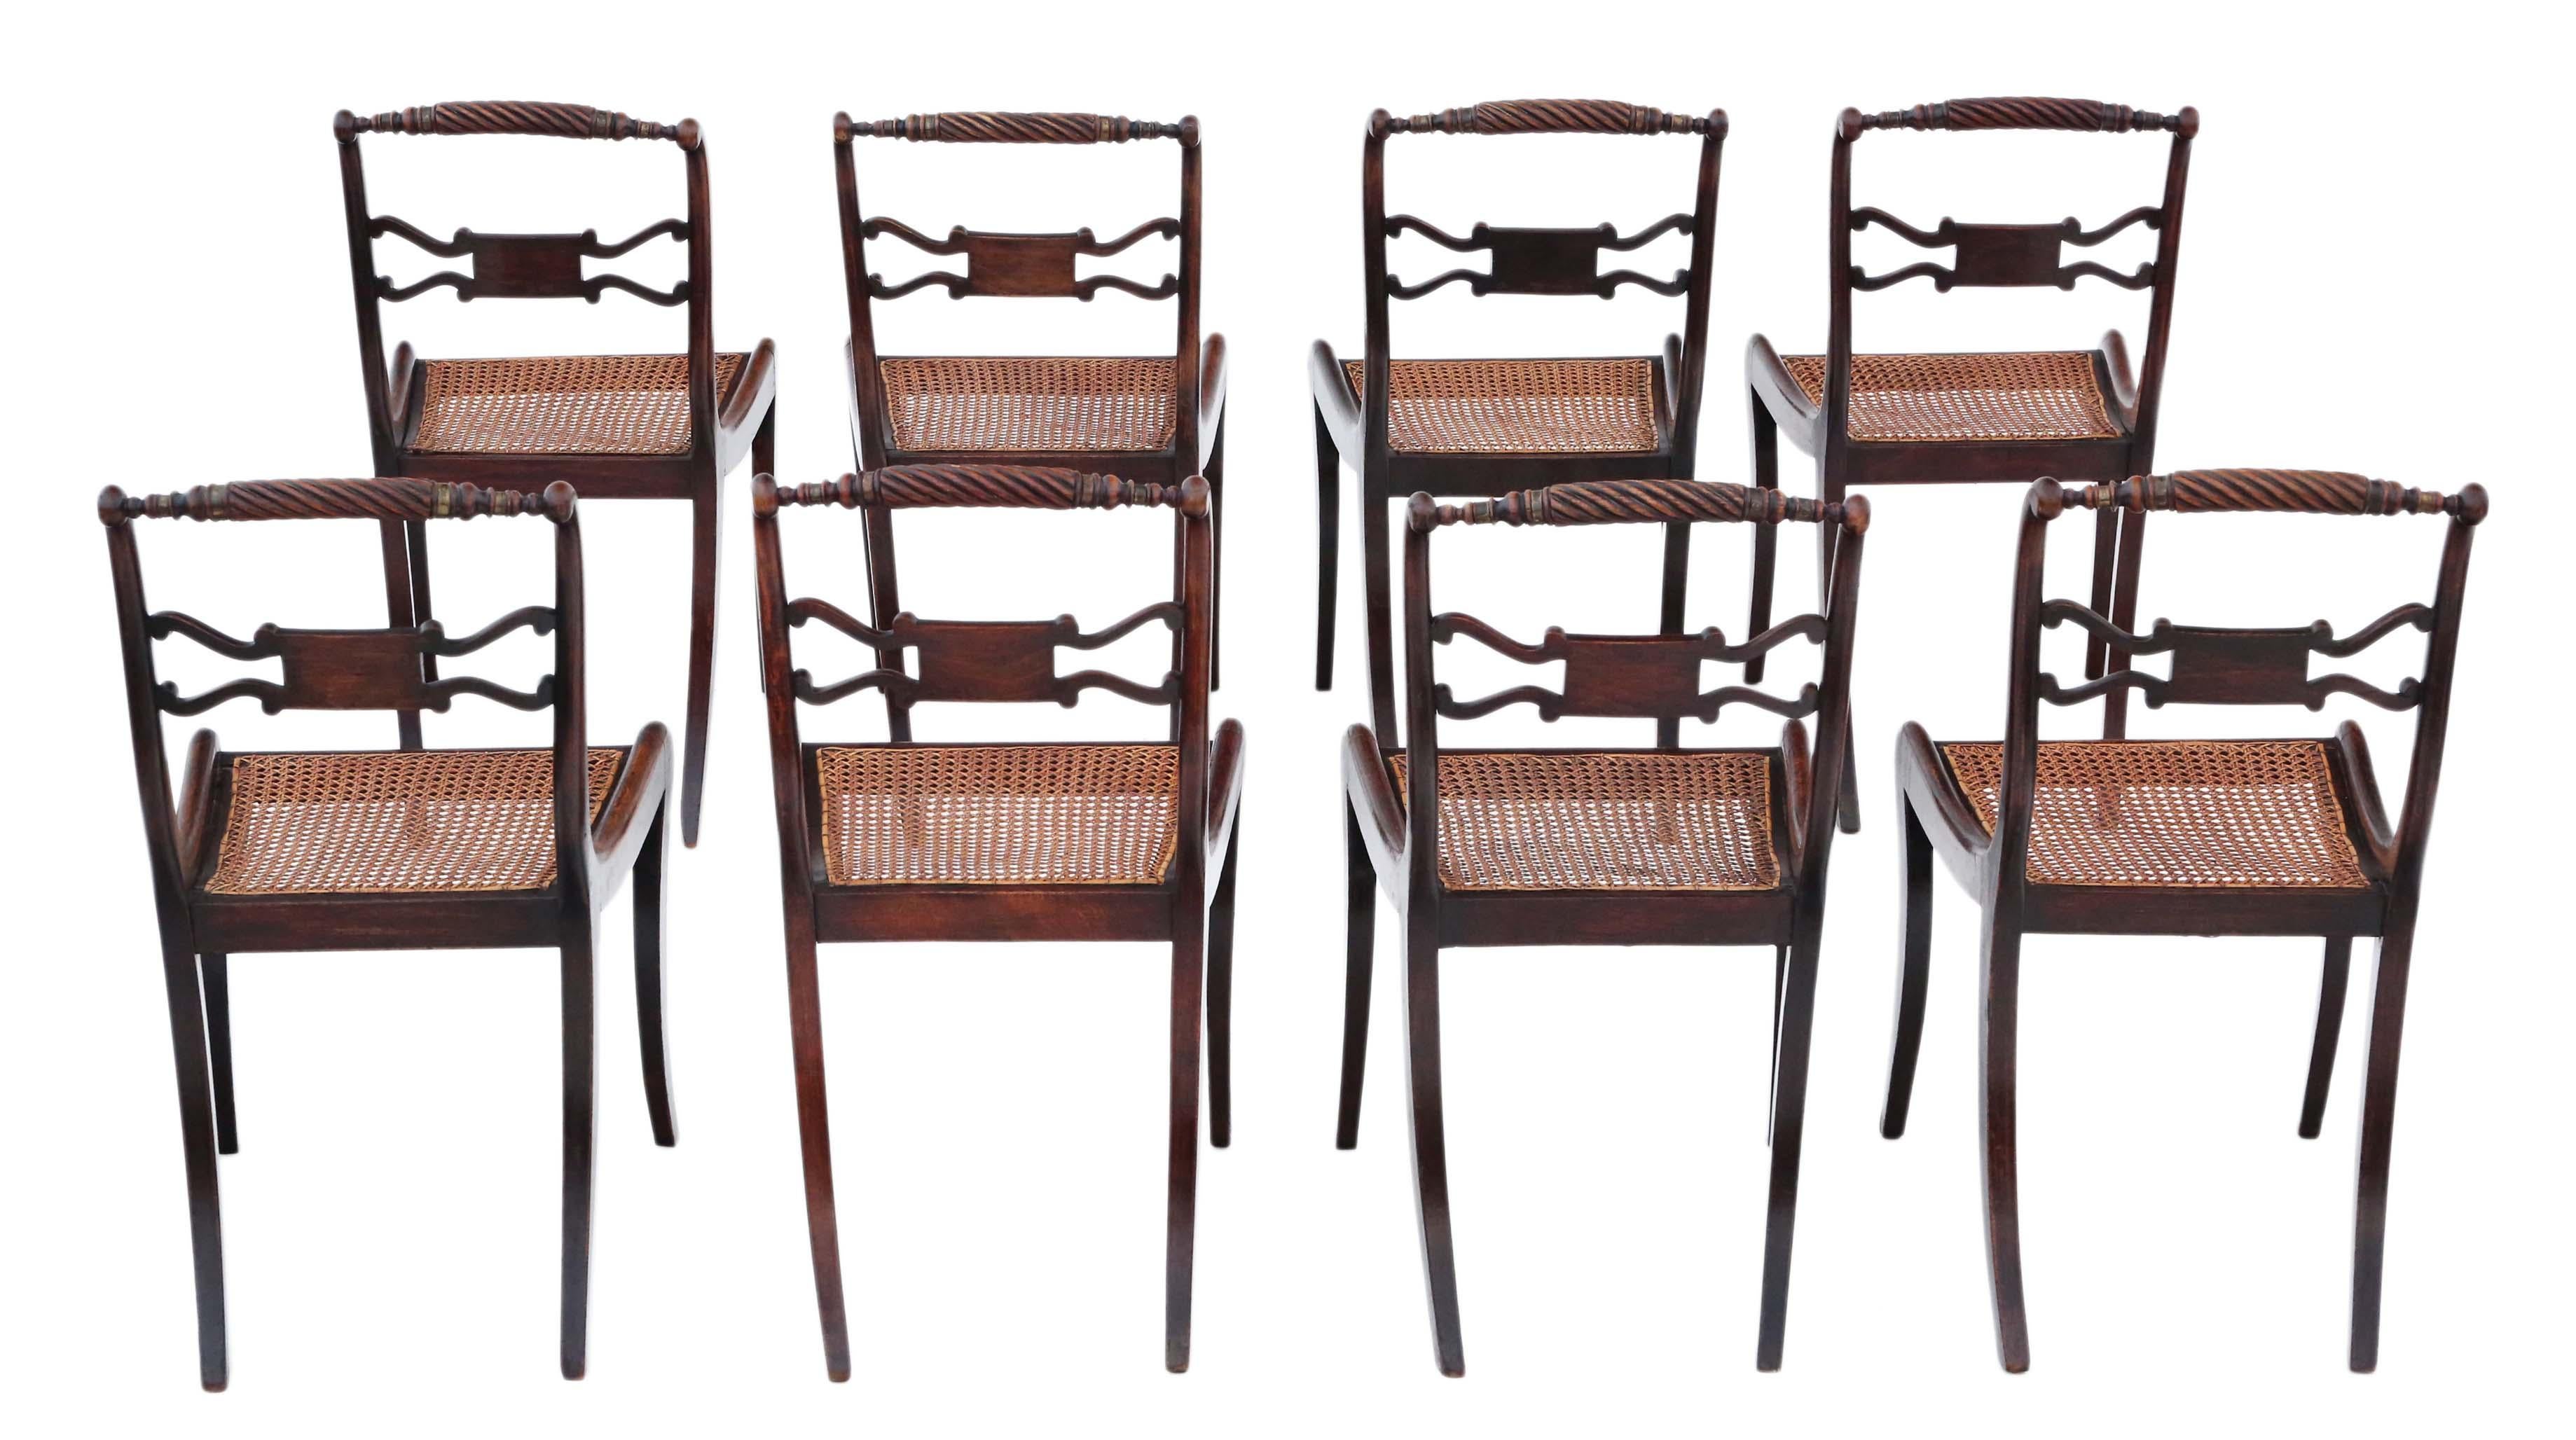 Regency Faux Rosewood Dining Chairs: Set of 8, Antique Quality, 19th Century In Good Condition In Wisbech, Cambridgeshire